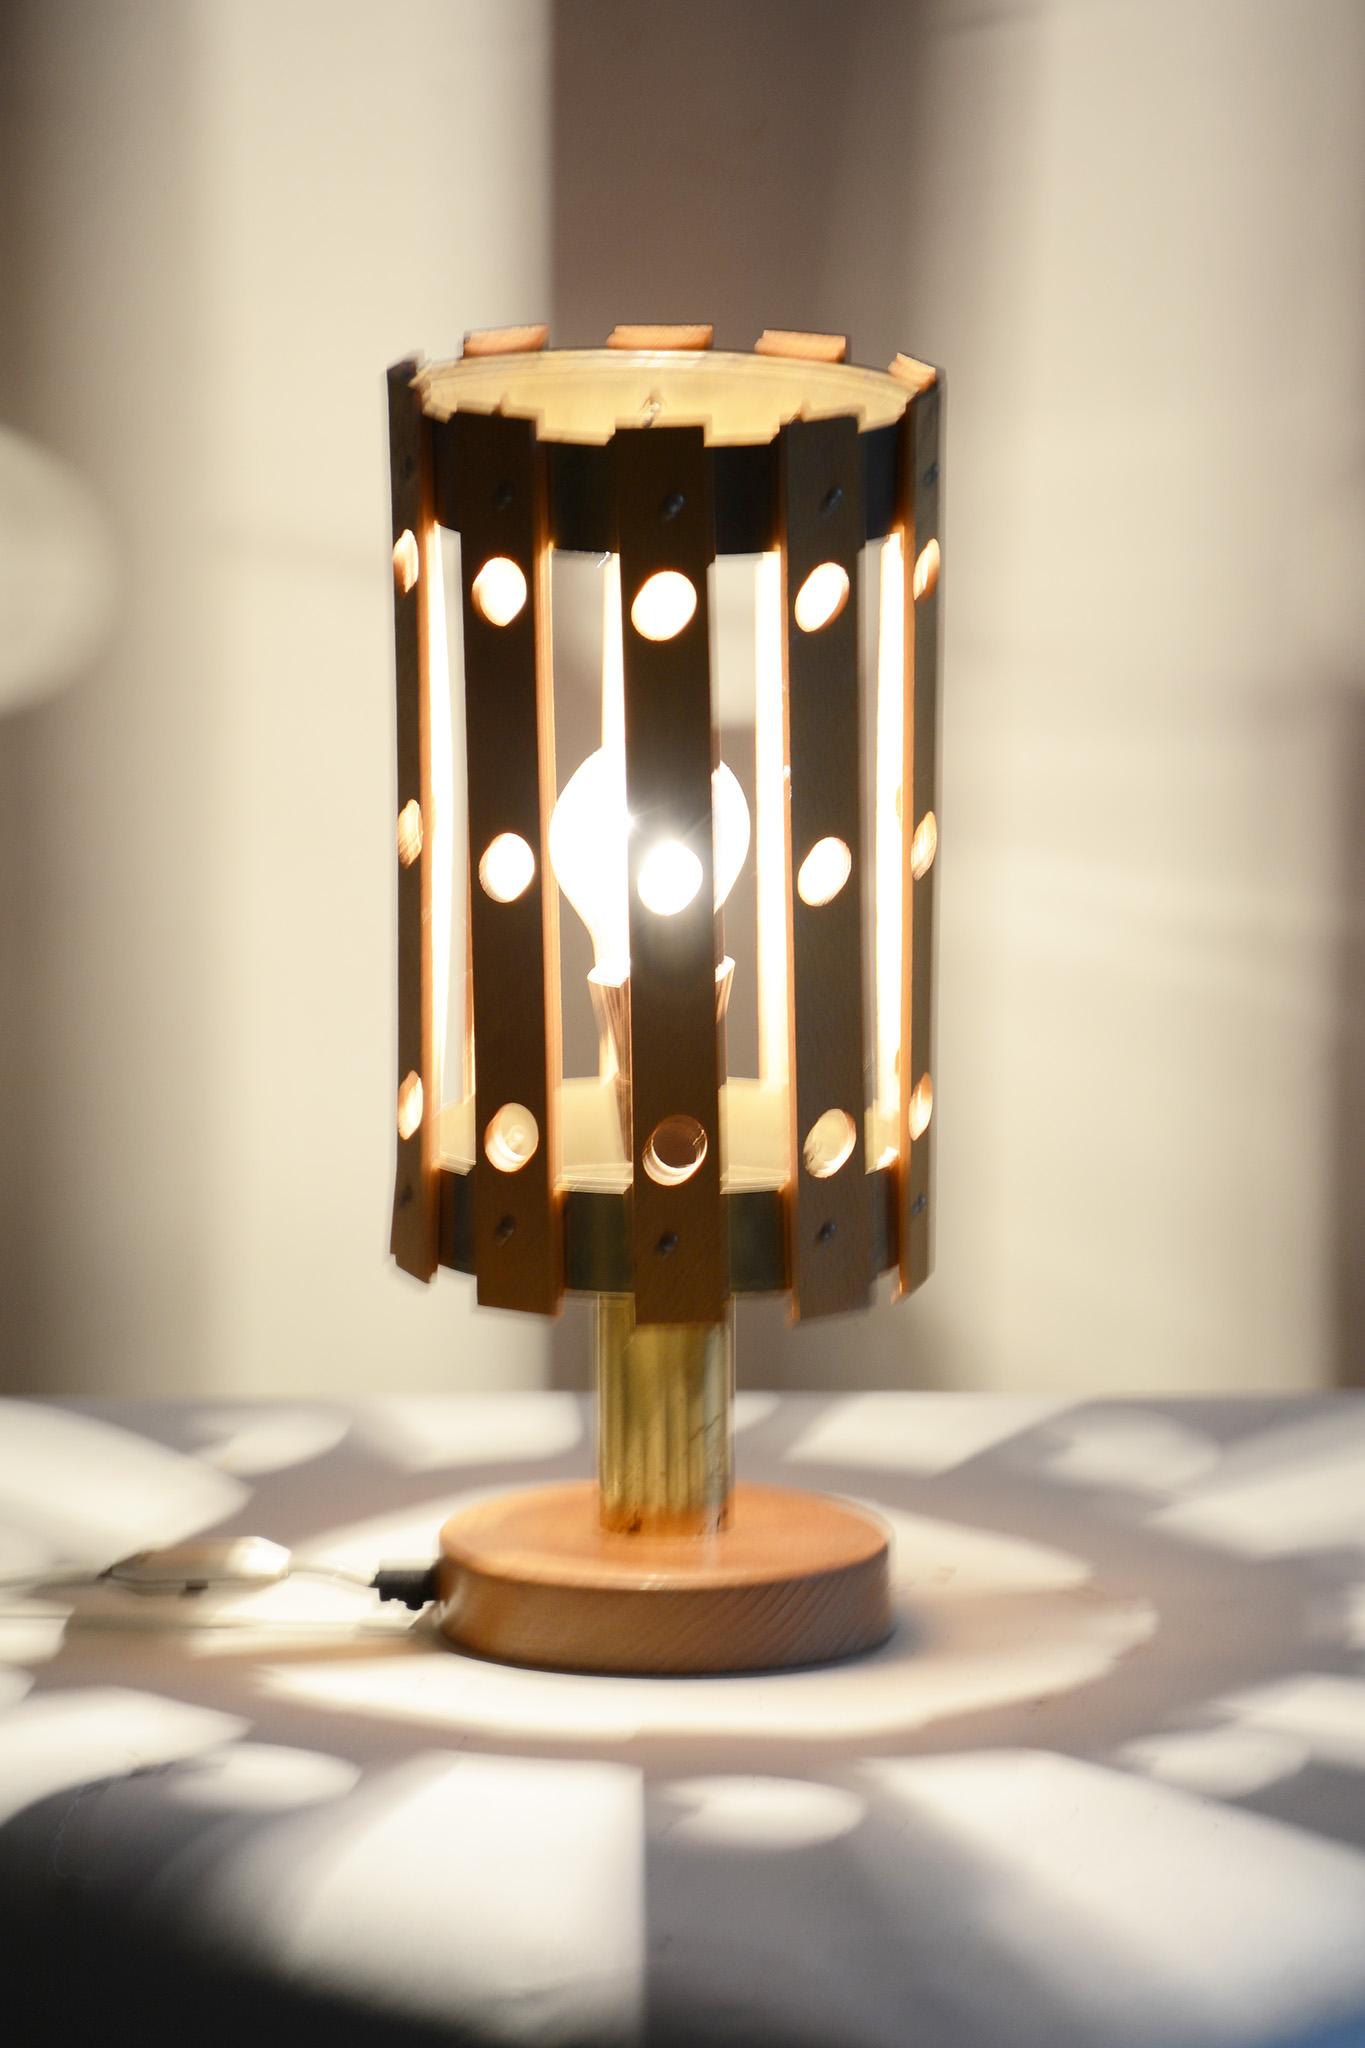 Midcentury Table Lamp Made by Pokrok Zilina

Period: 1960-1969
Maker: Pokrok Zilina
Source: Slovakia
Material: Beech, Brass

This item features classic Mid-Century Modern (MCM) design elements. Elements of MCM interior design include clean